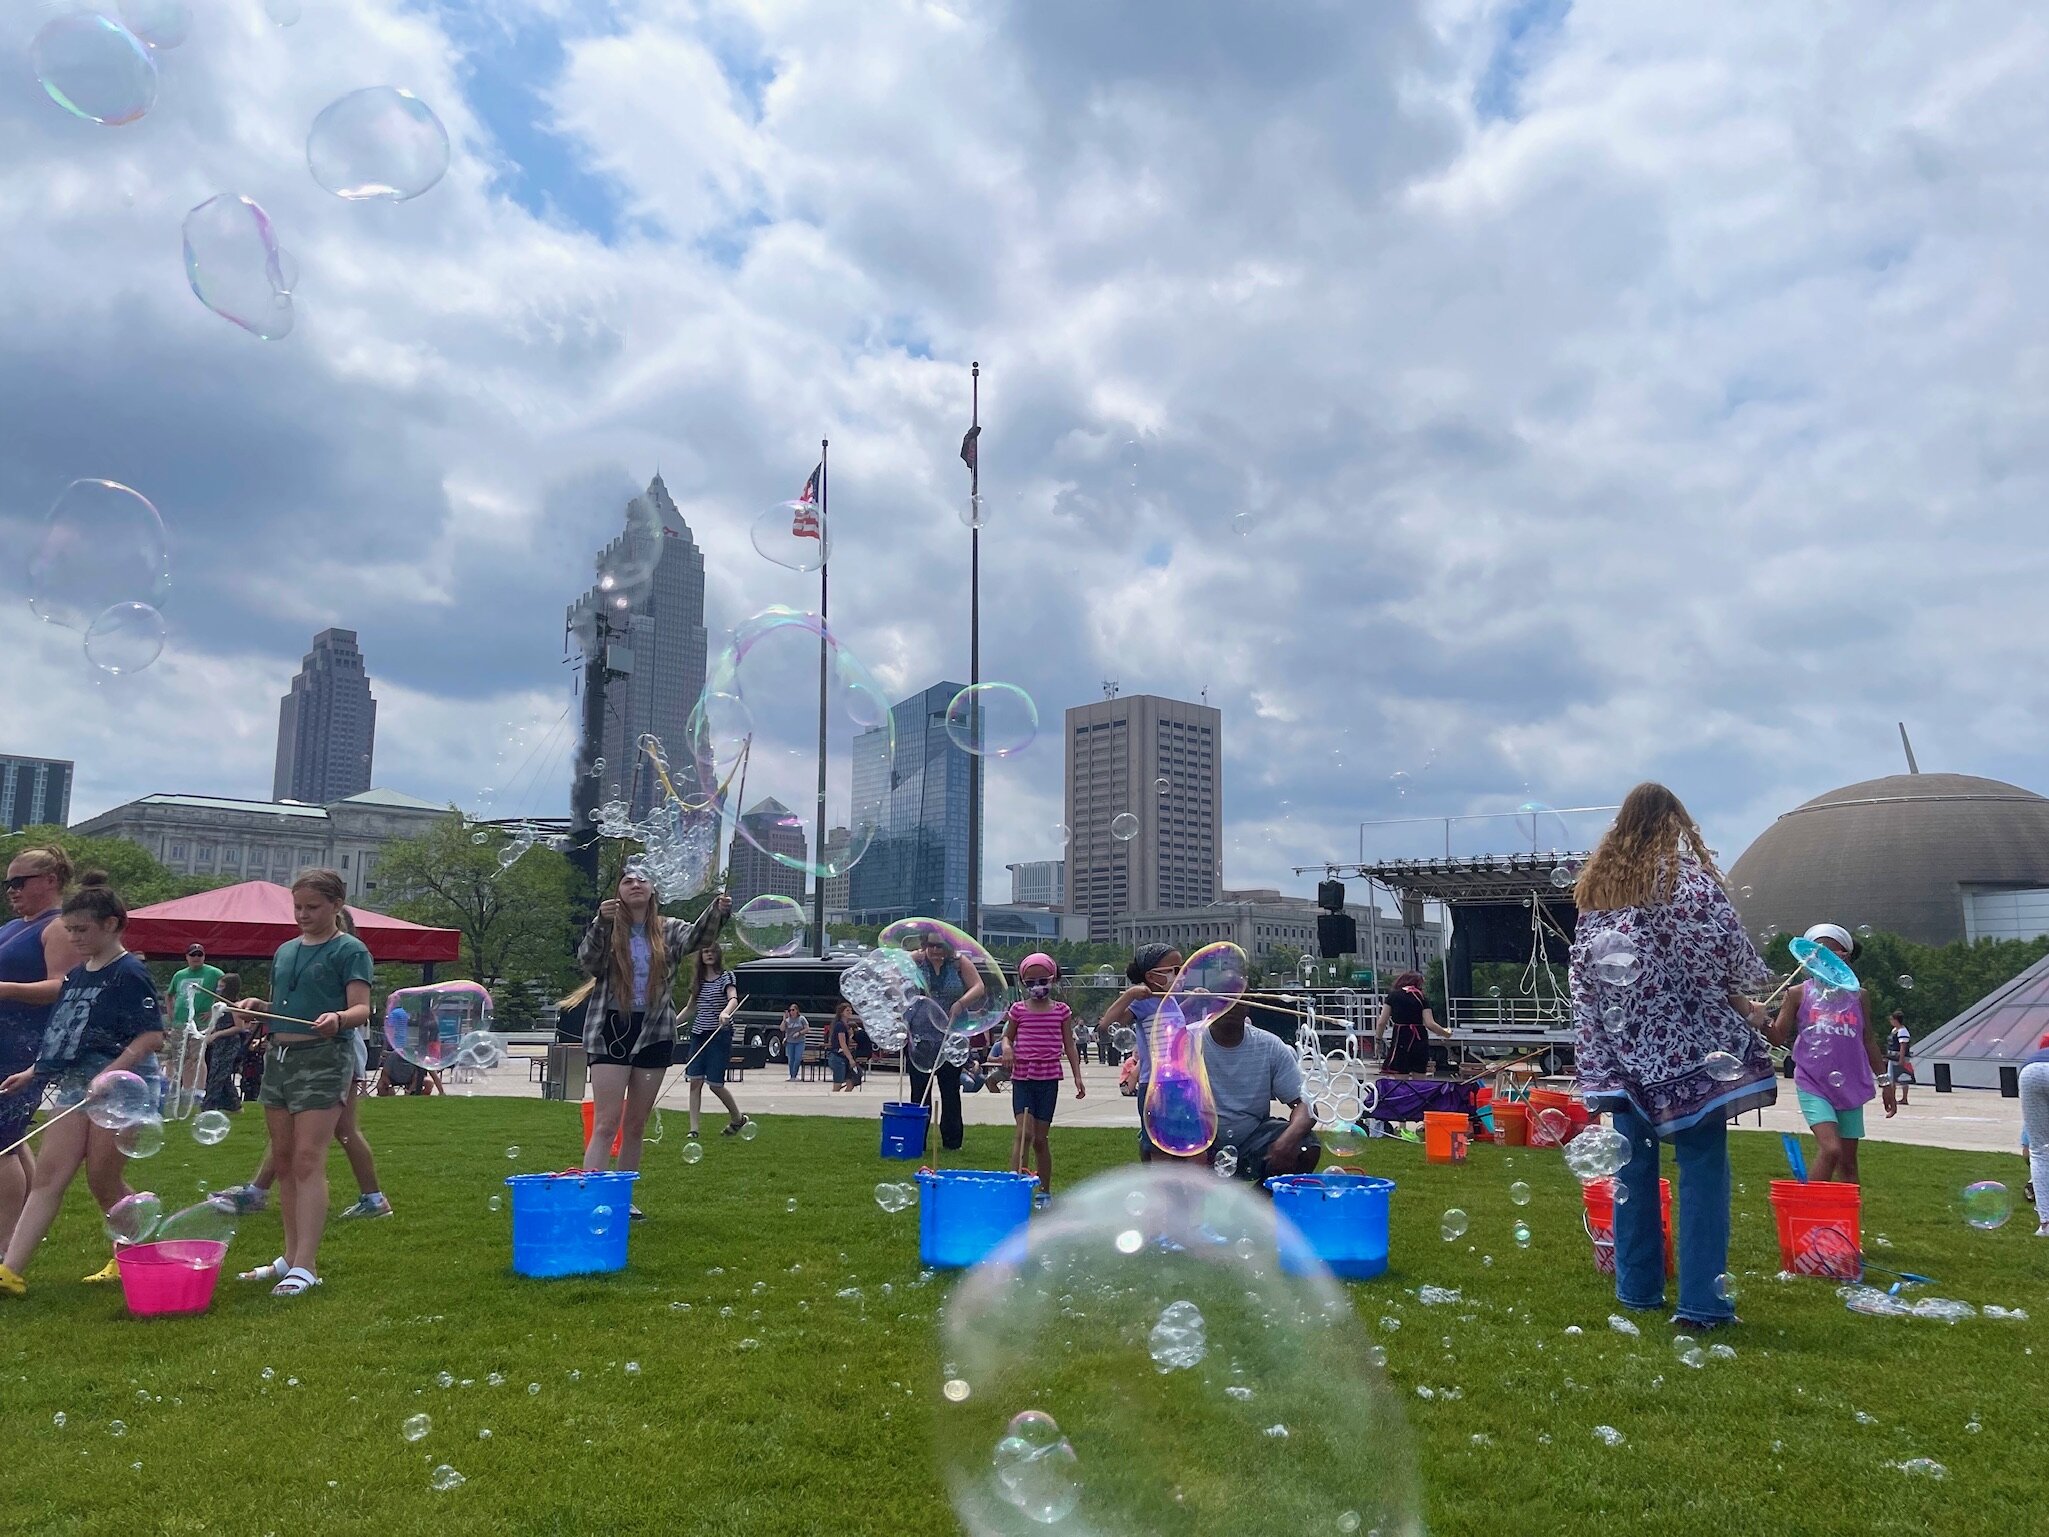  Outside the  Rock and Roll Hall of Fame  in downtown  Cleveland, Ohio.  This place was hopping on the day of our visit. A young group of students from the School of Rock in Cleveland were performing and across the lawn, the bubbles were a-flyin’. 